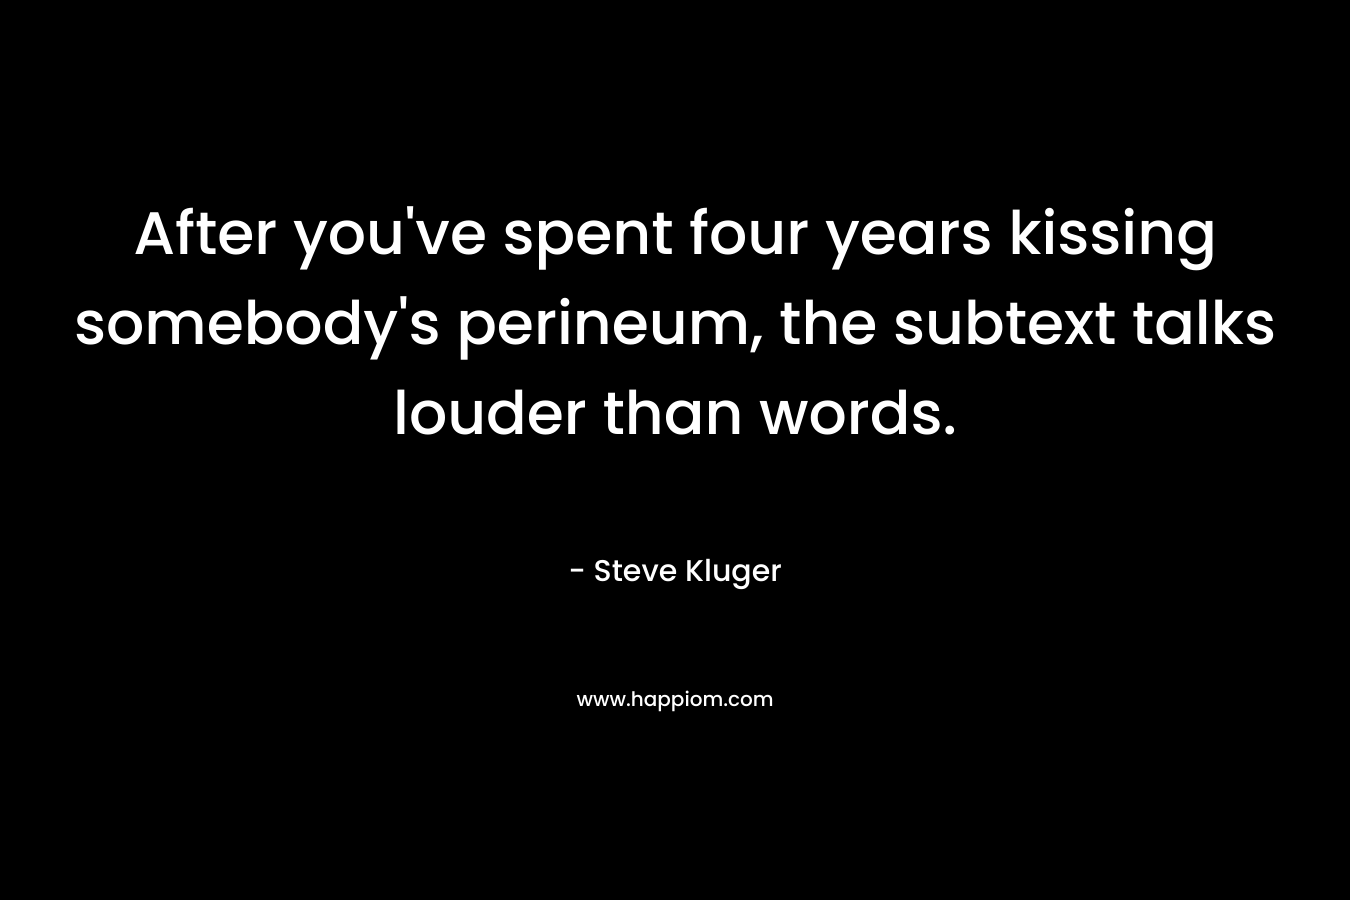 After you’ve spent four years kissing somebody’s perineum, the subtext talks louder than words. – Steve Kluger